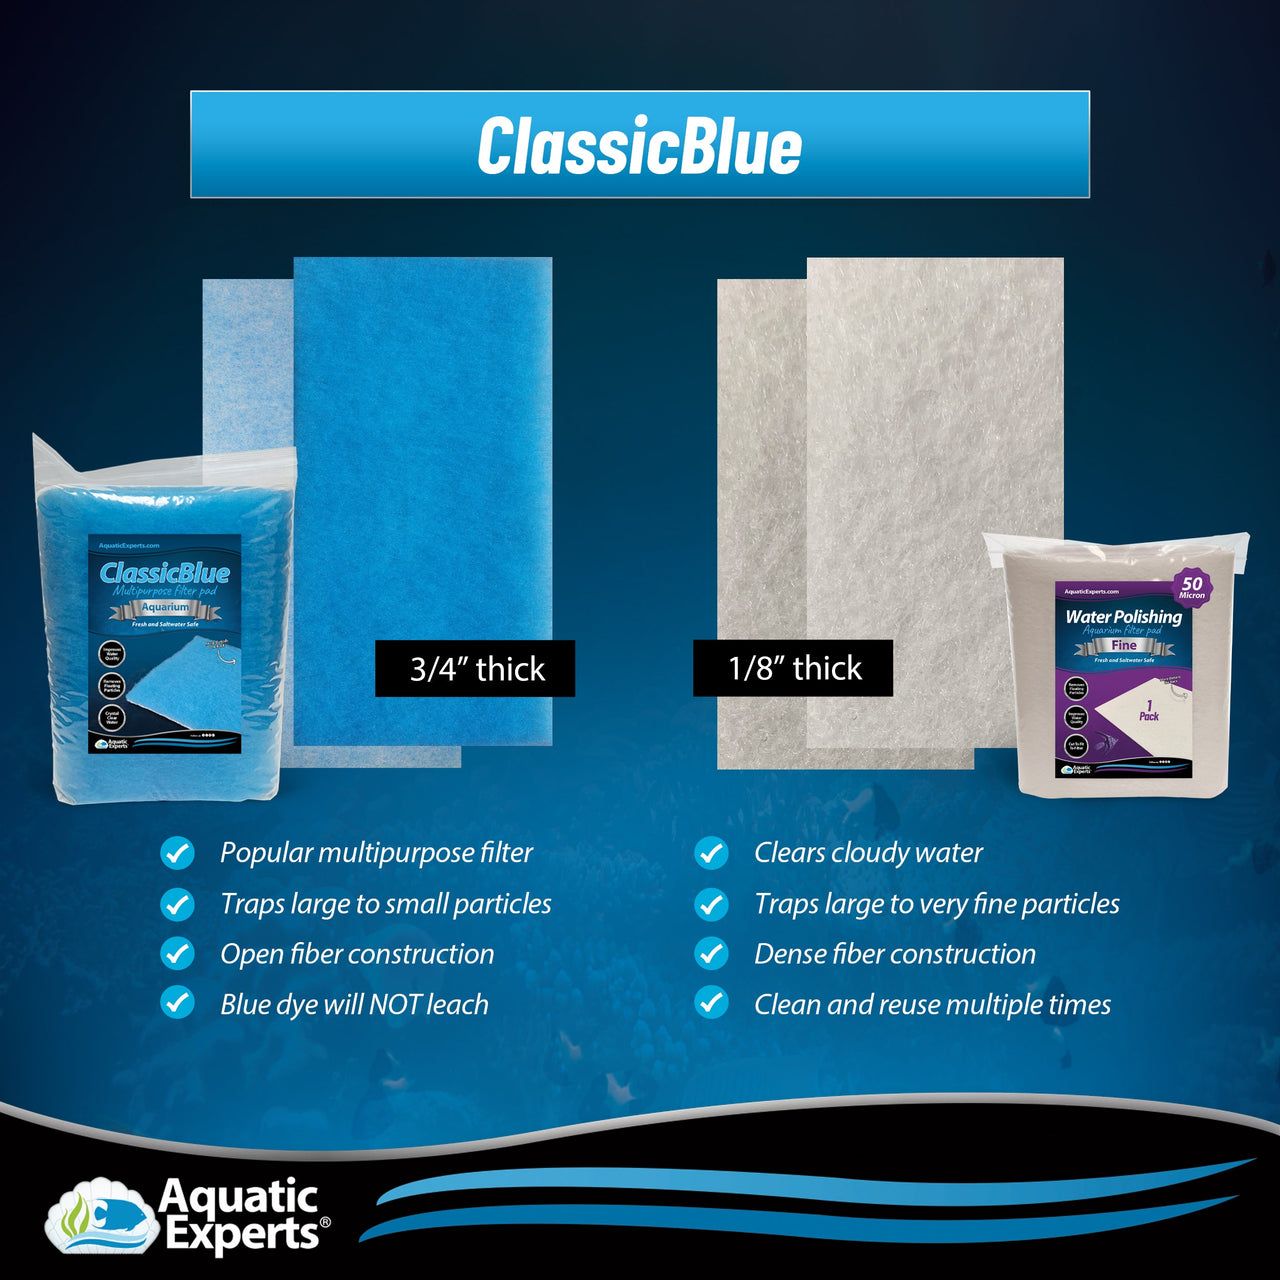 Safety pad for aquariums, $ 4.78